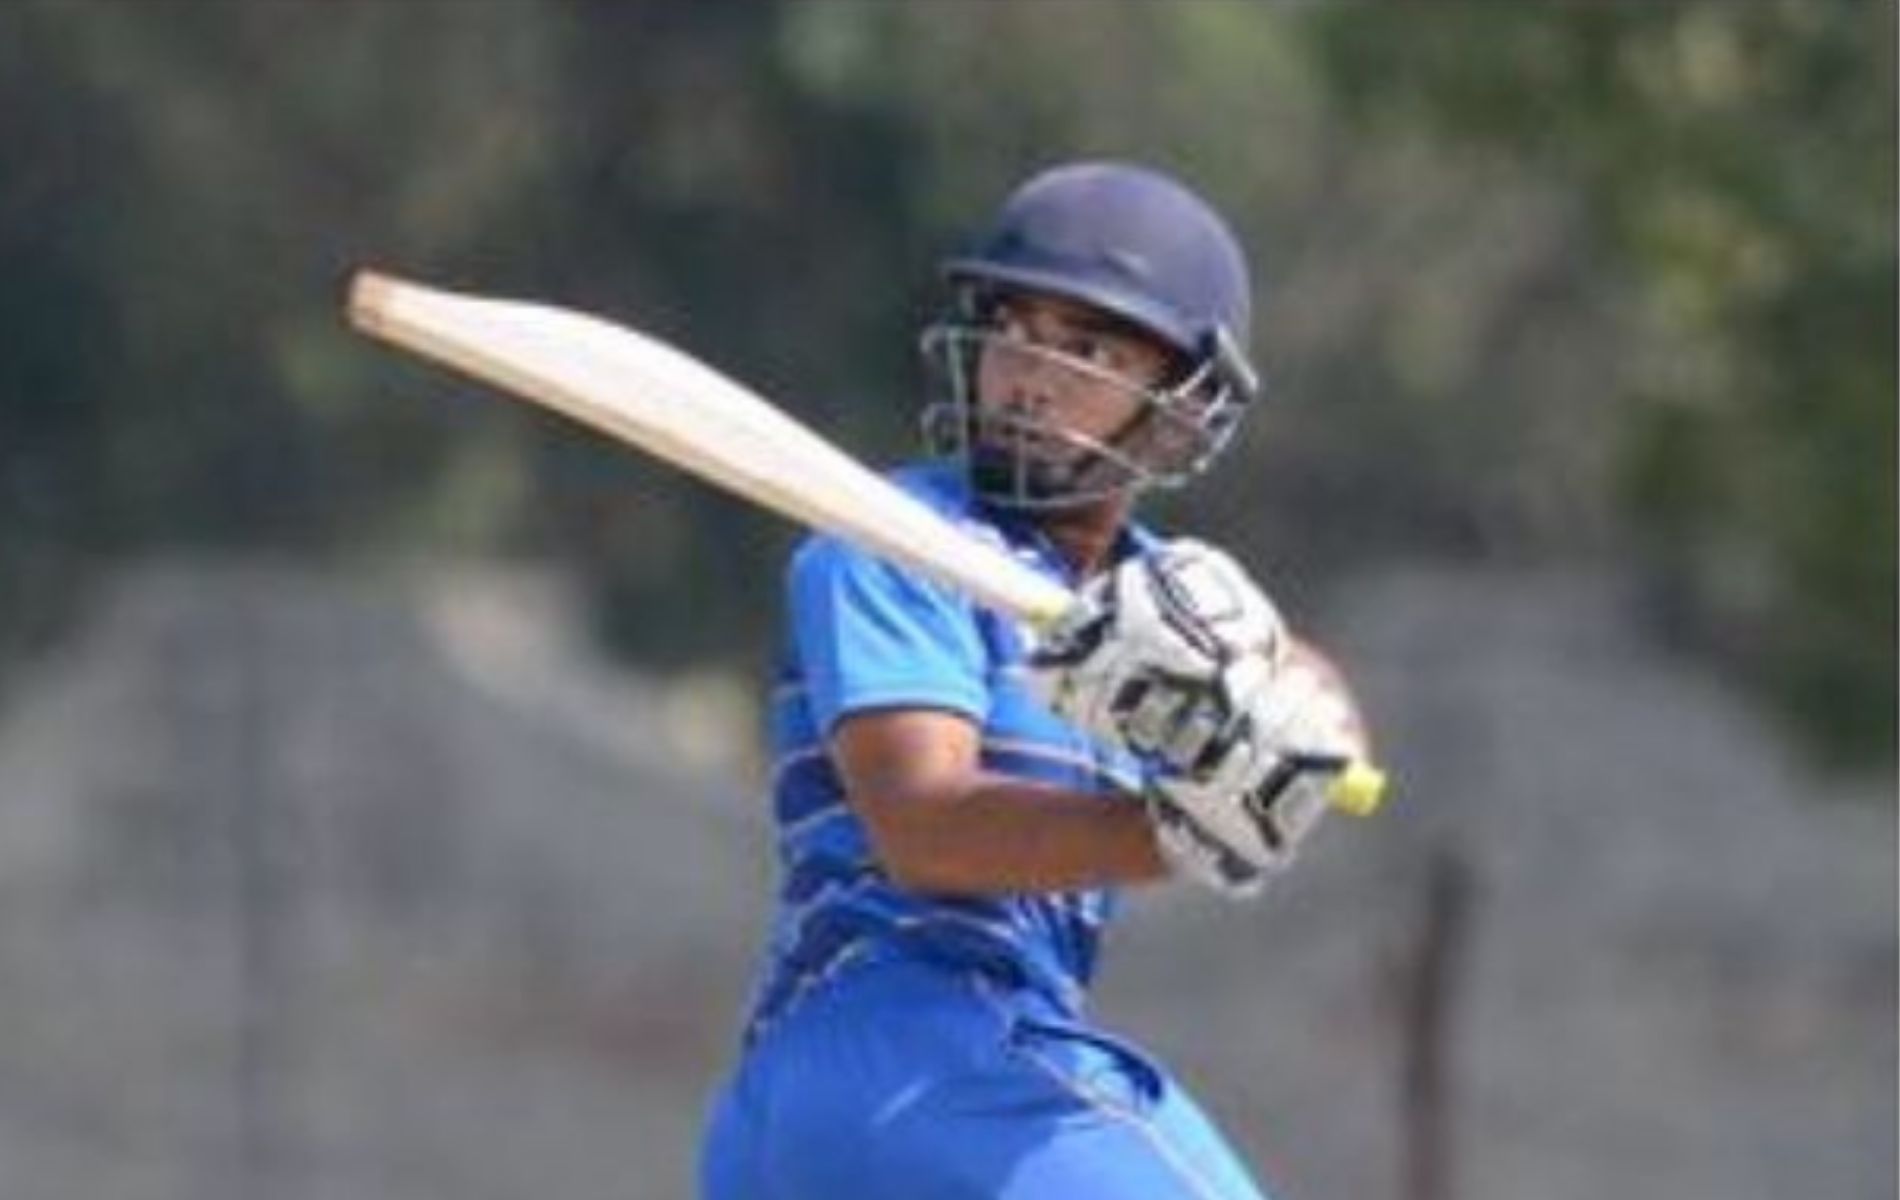 Tanmay Agarwal had a top score of 97* in Syed Mushtaq Ali Trophy 2021.